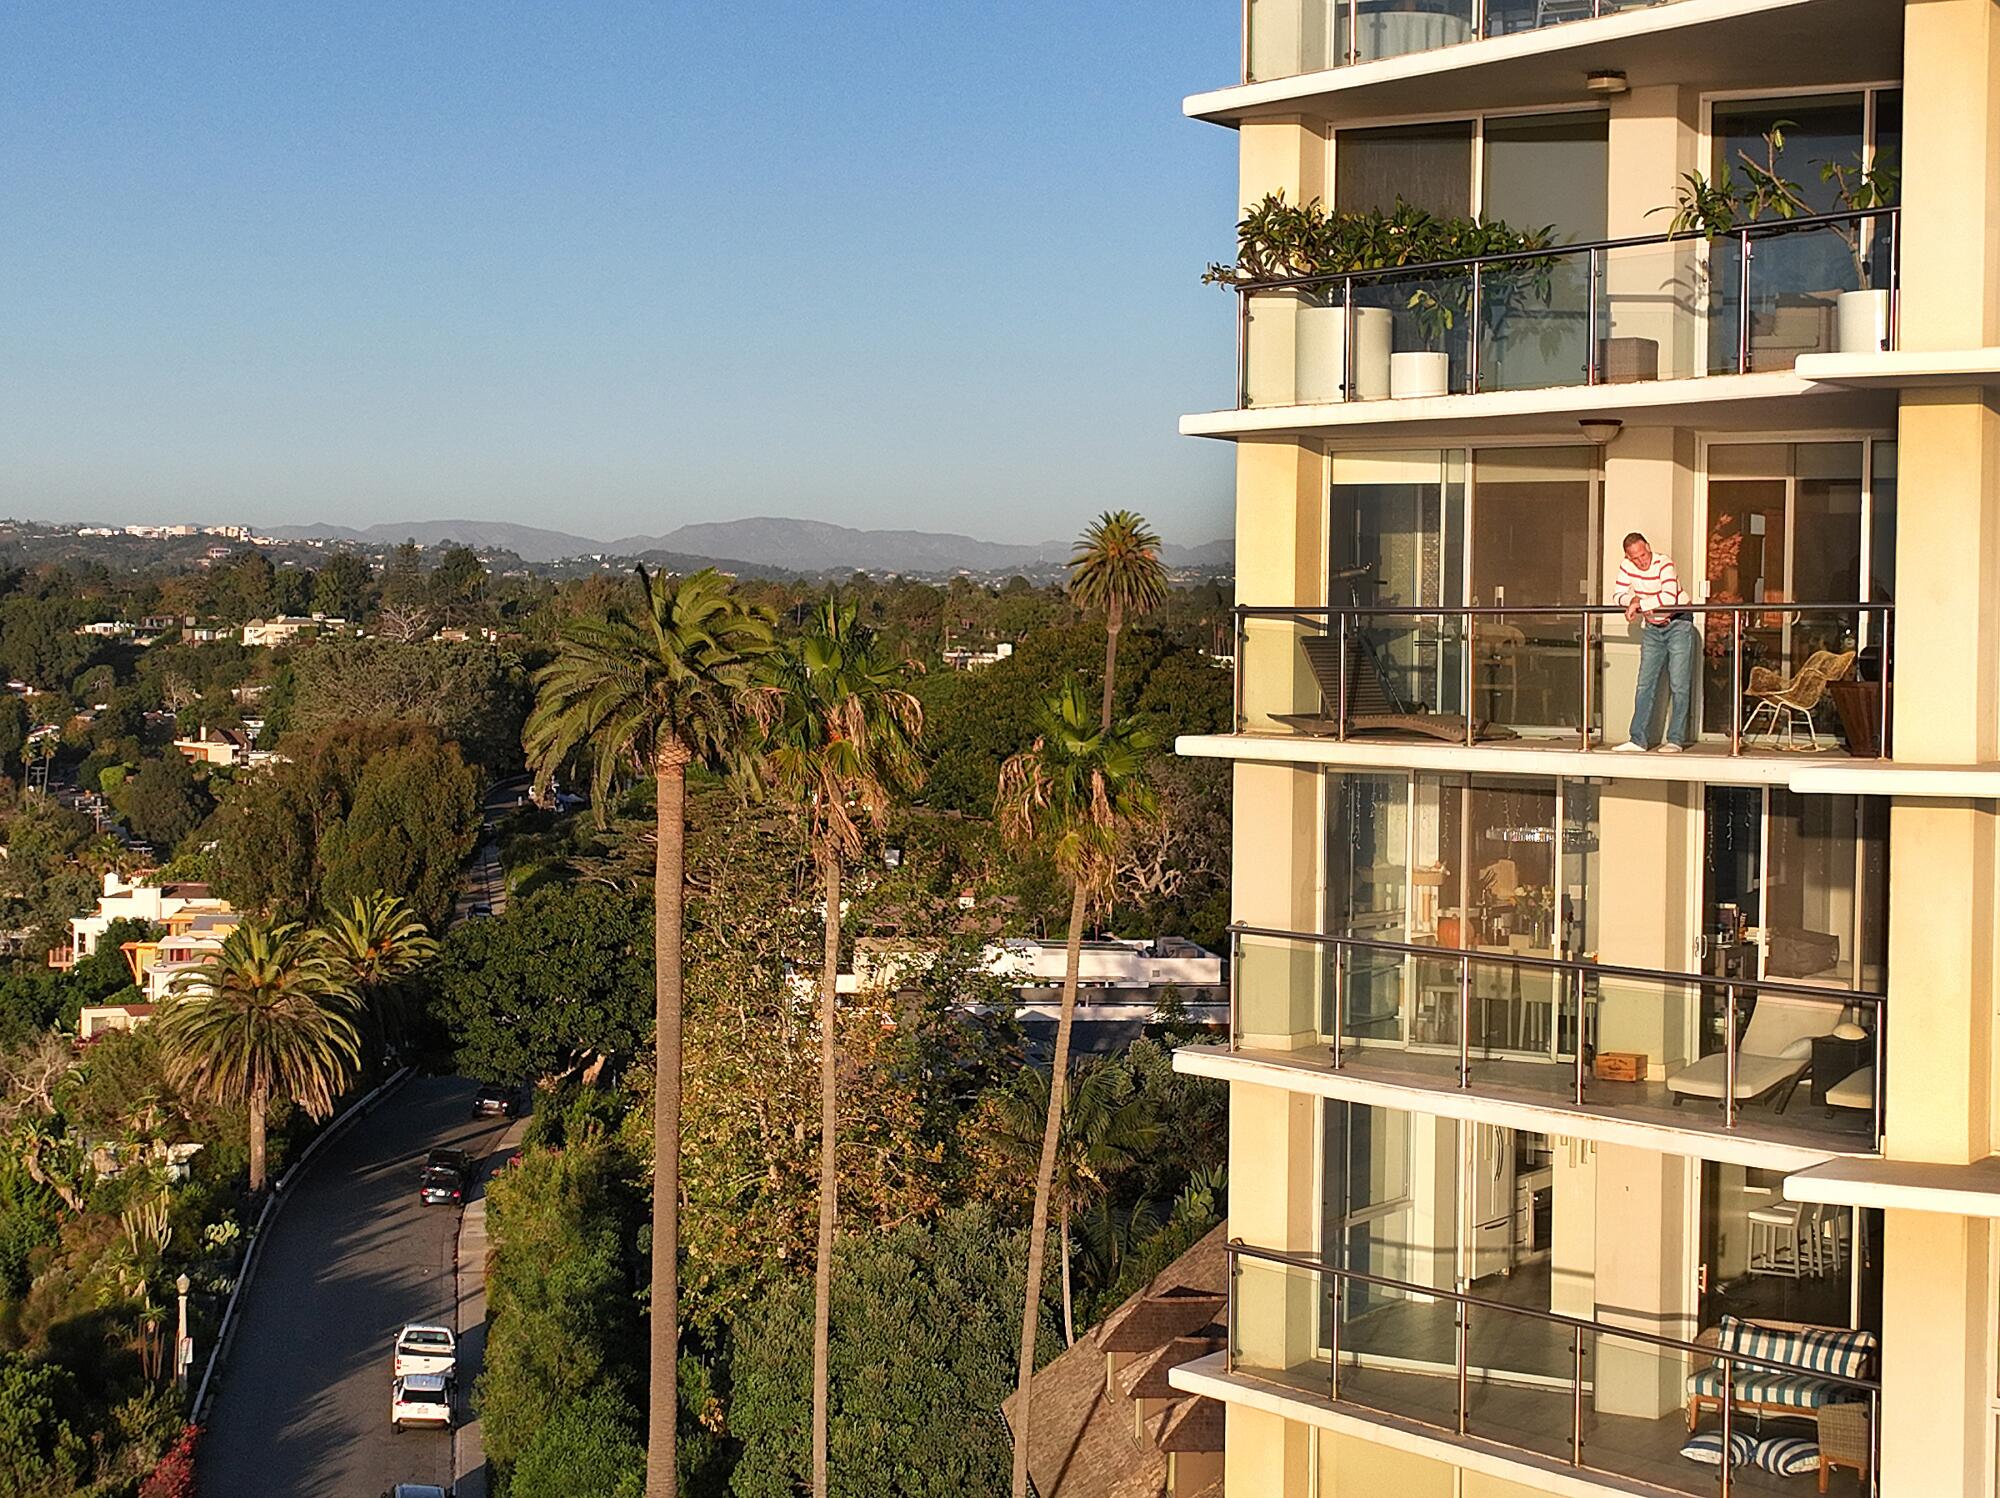 A person stands on a balcony of a residential tower above a tree-lined street.